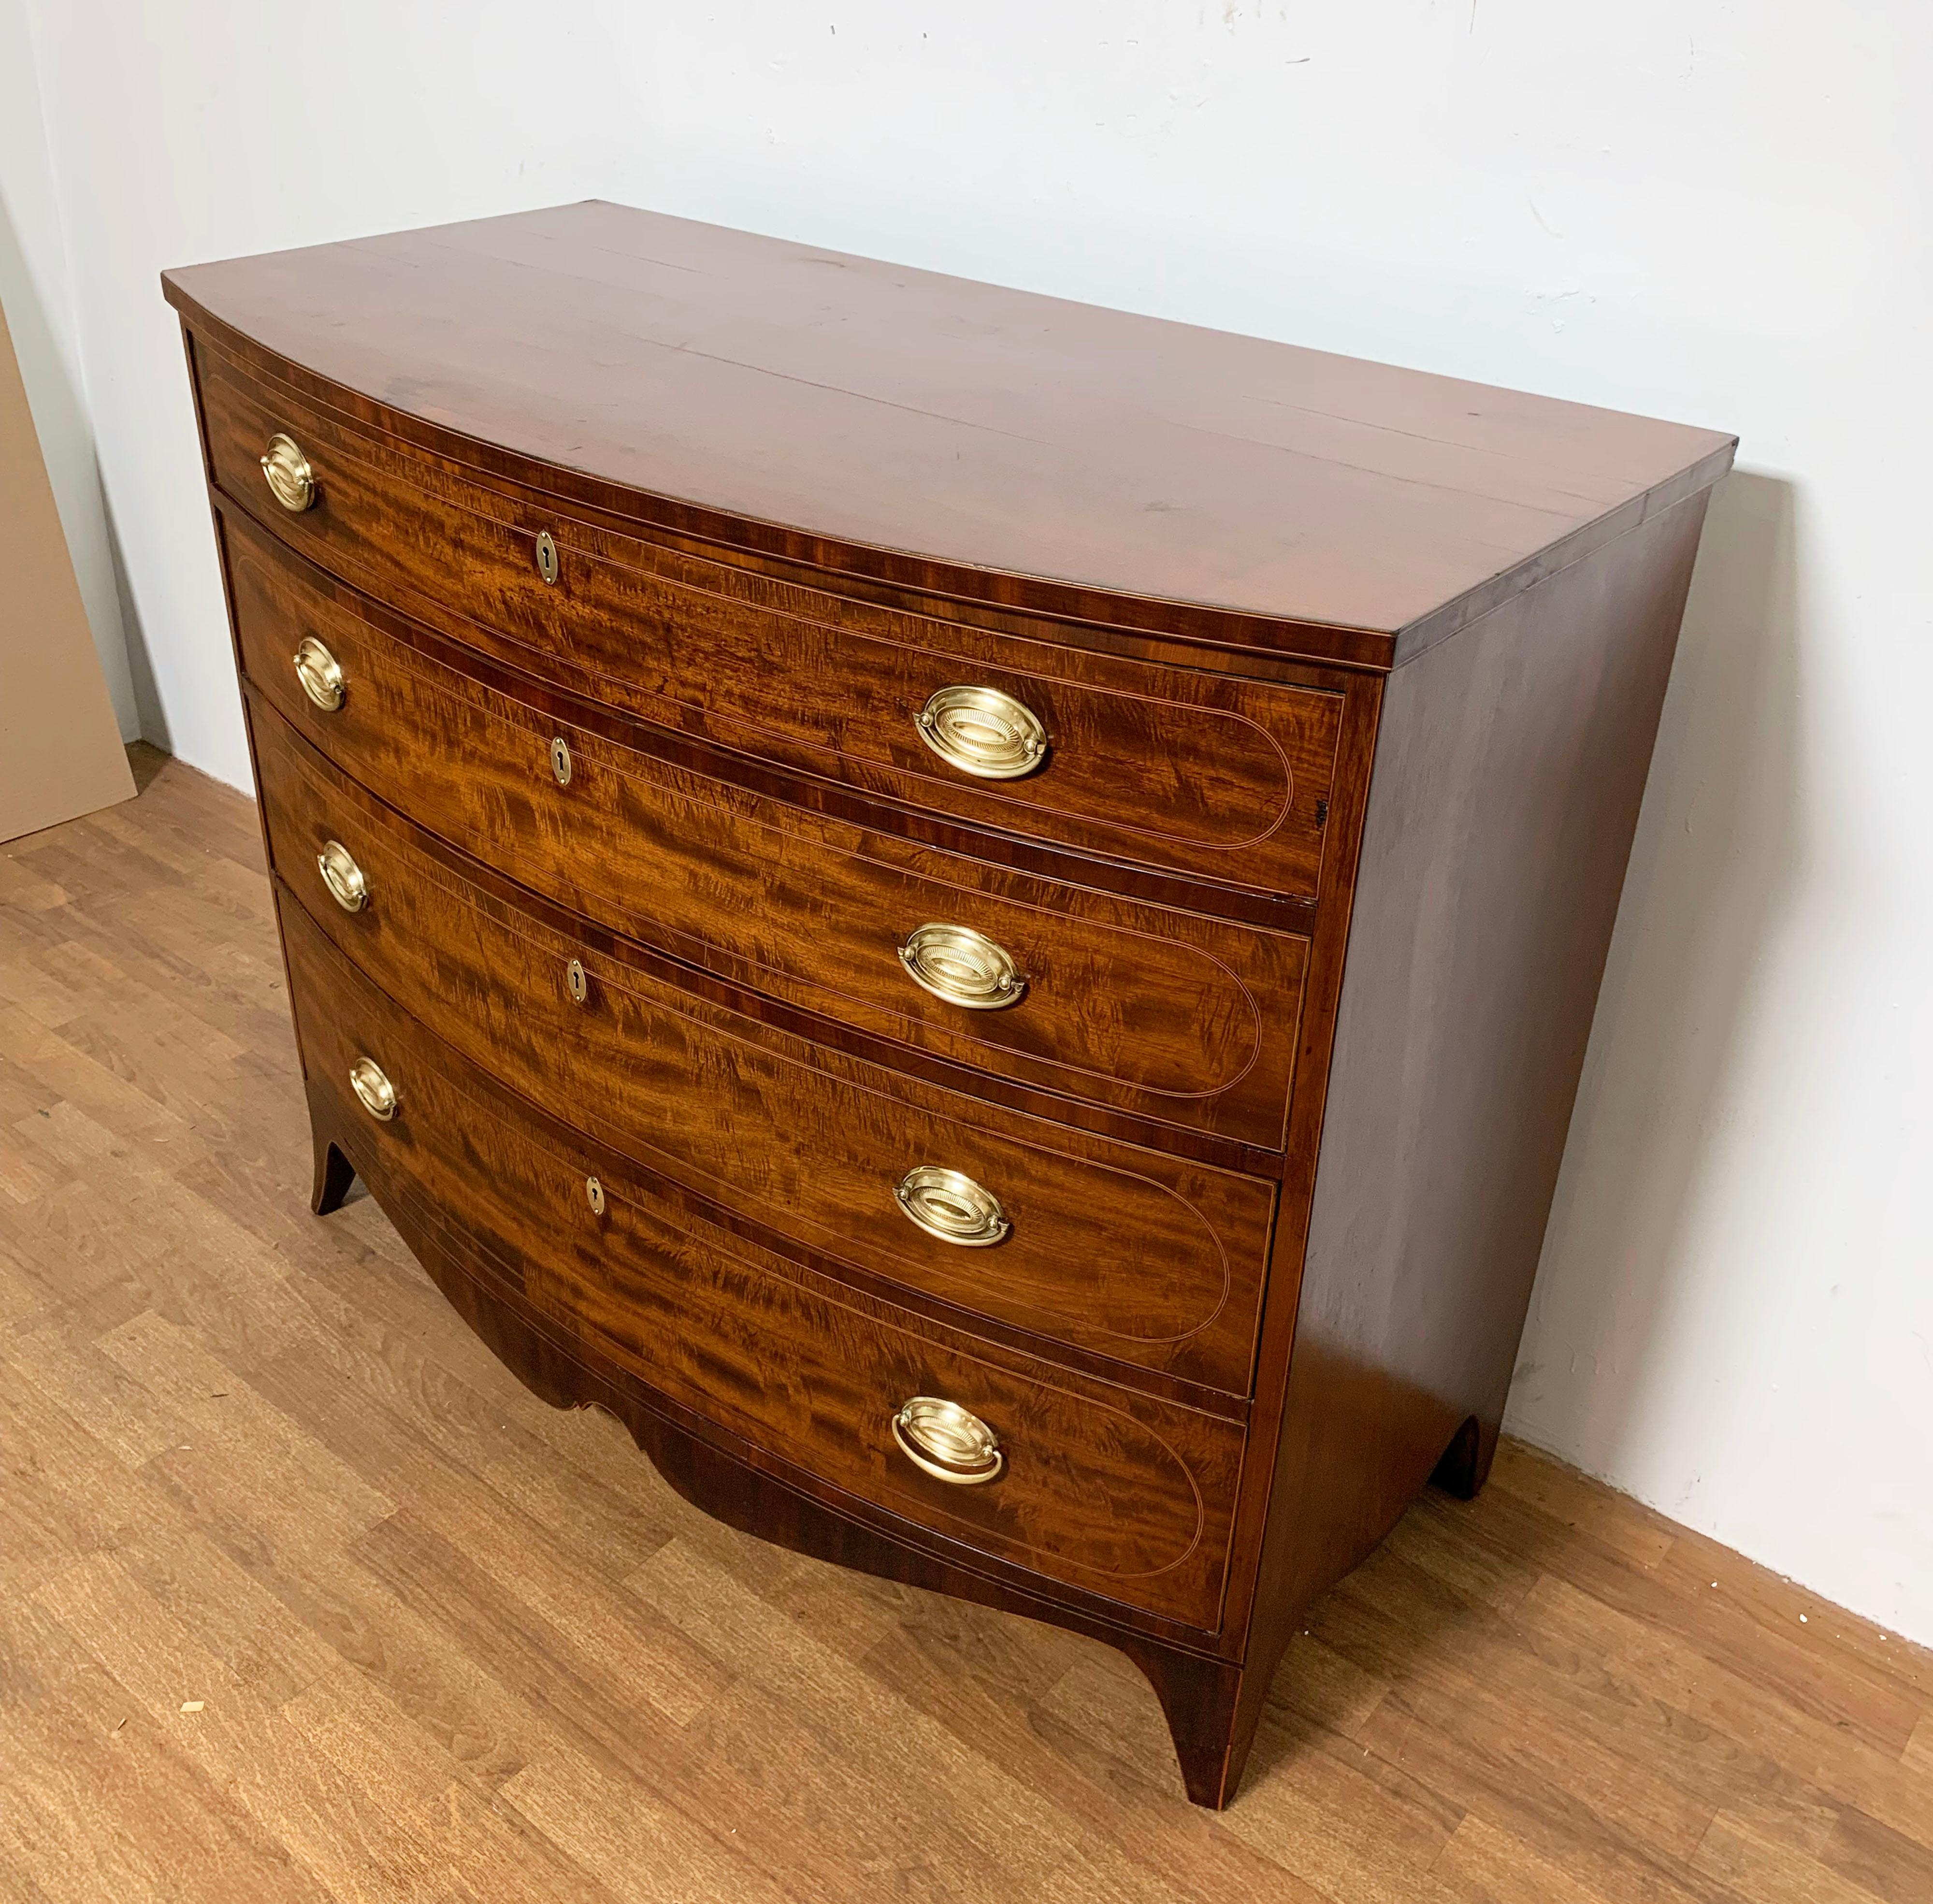 A fine and generously proportioned antique Federal bow front chest of flame mahogany with string banding and French feet, ca. 1790.